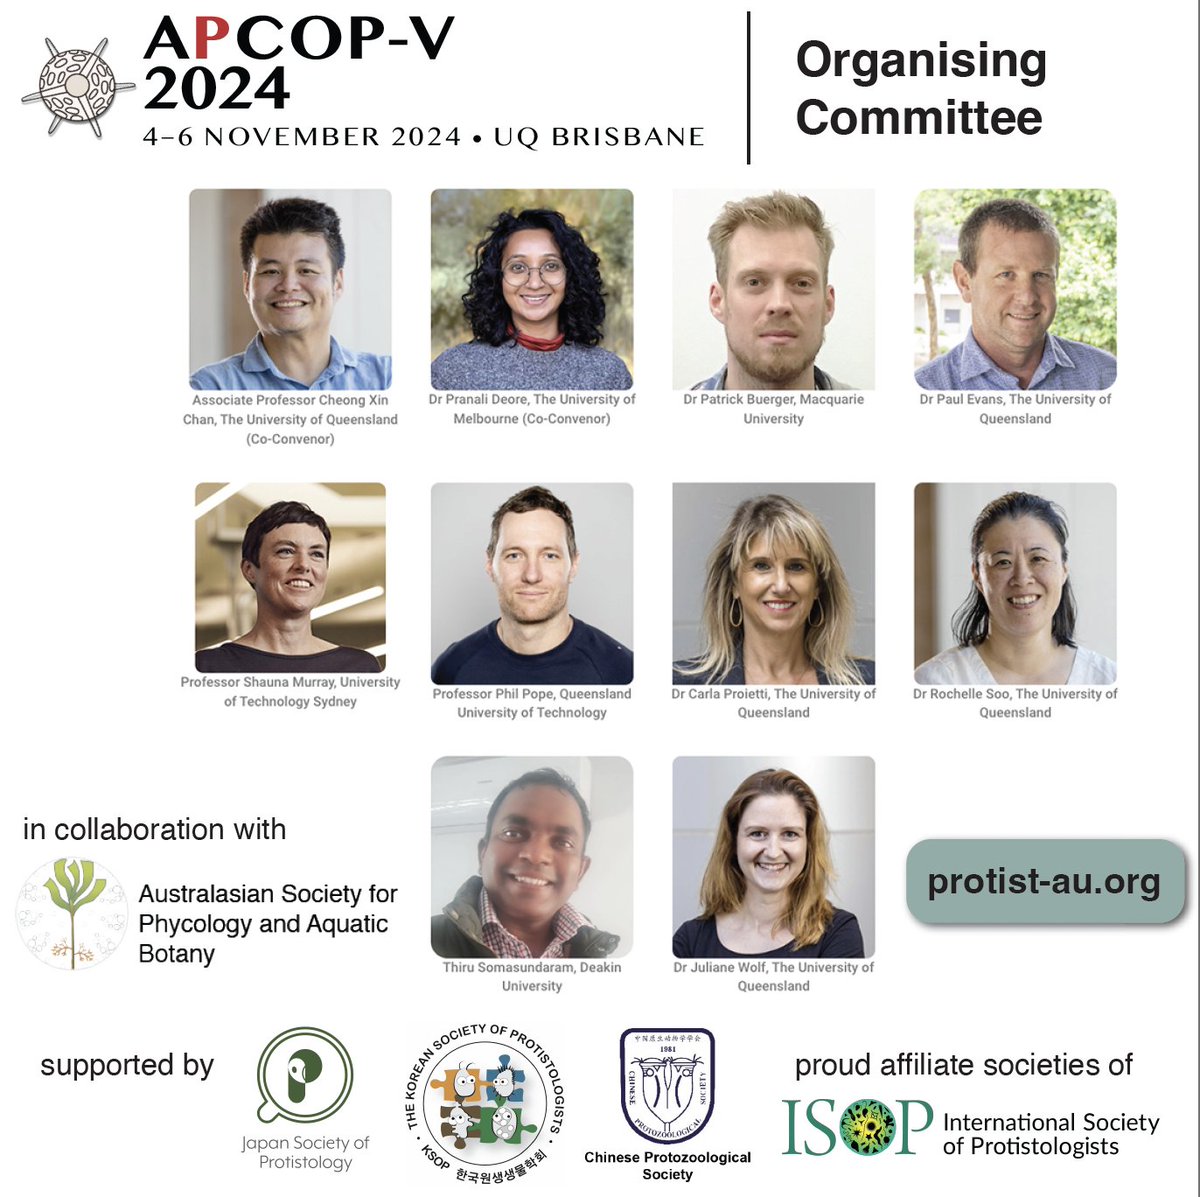 The Organising Committee is excited to bring APCOP-V to Brisbane, collab w/Australasian Society Phycology & Aquatic Botany @ASPABites, supported by our 🇯🇵🇰🇷🇨🇳 colleagues + International Society of Protistologists @protistologists Call for Abstracts OPEN! protist-au.org